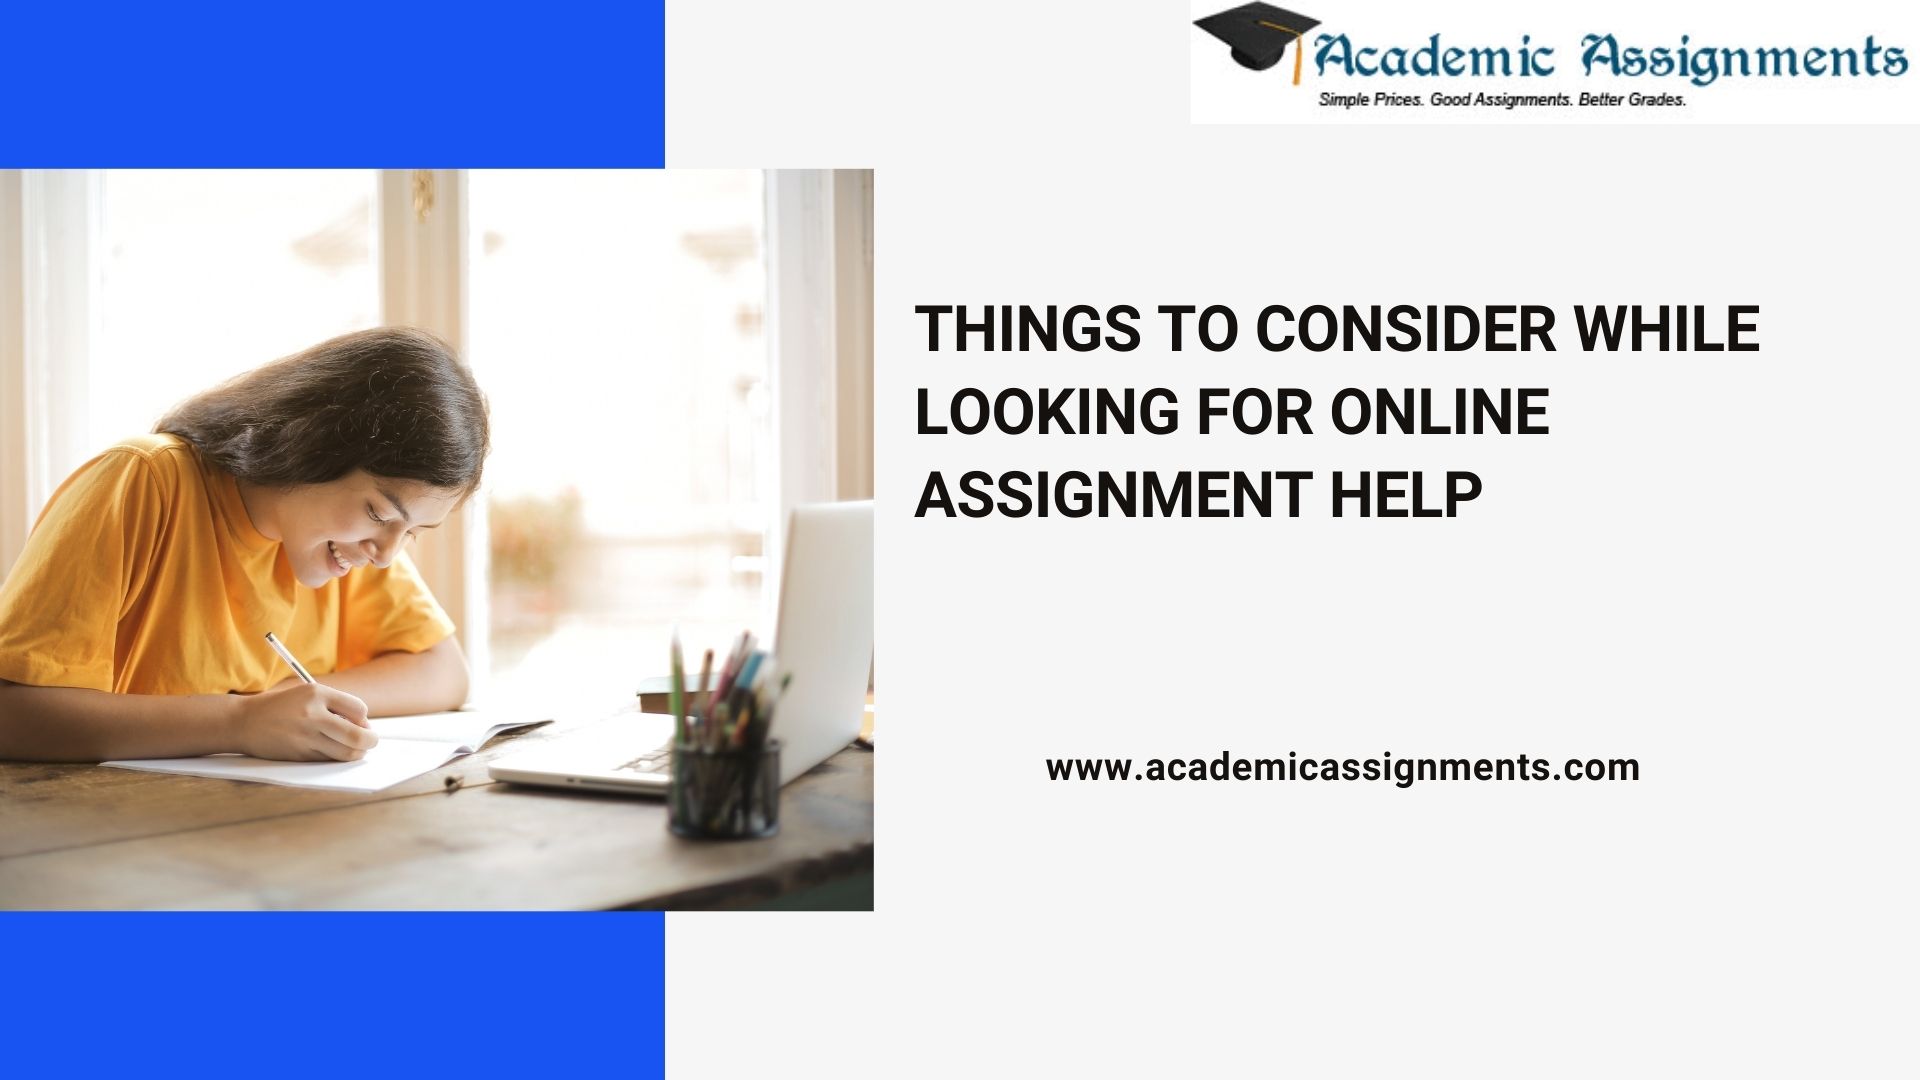 THINGS TO CONSIDER WHILE LOOKING FOR ONLINE ASSIGNMENT HELP